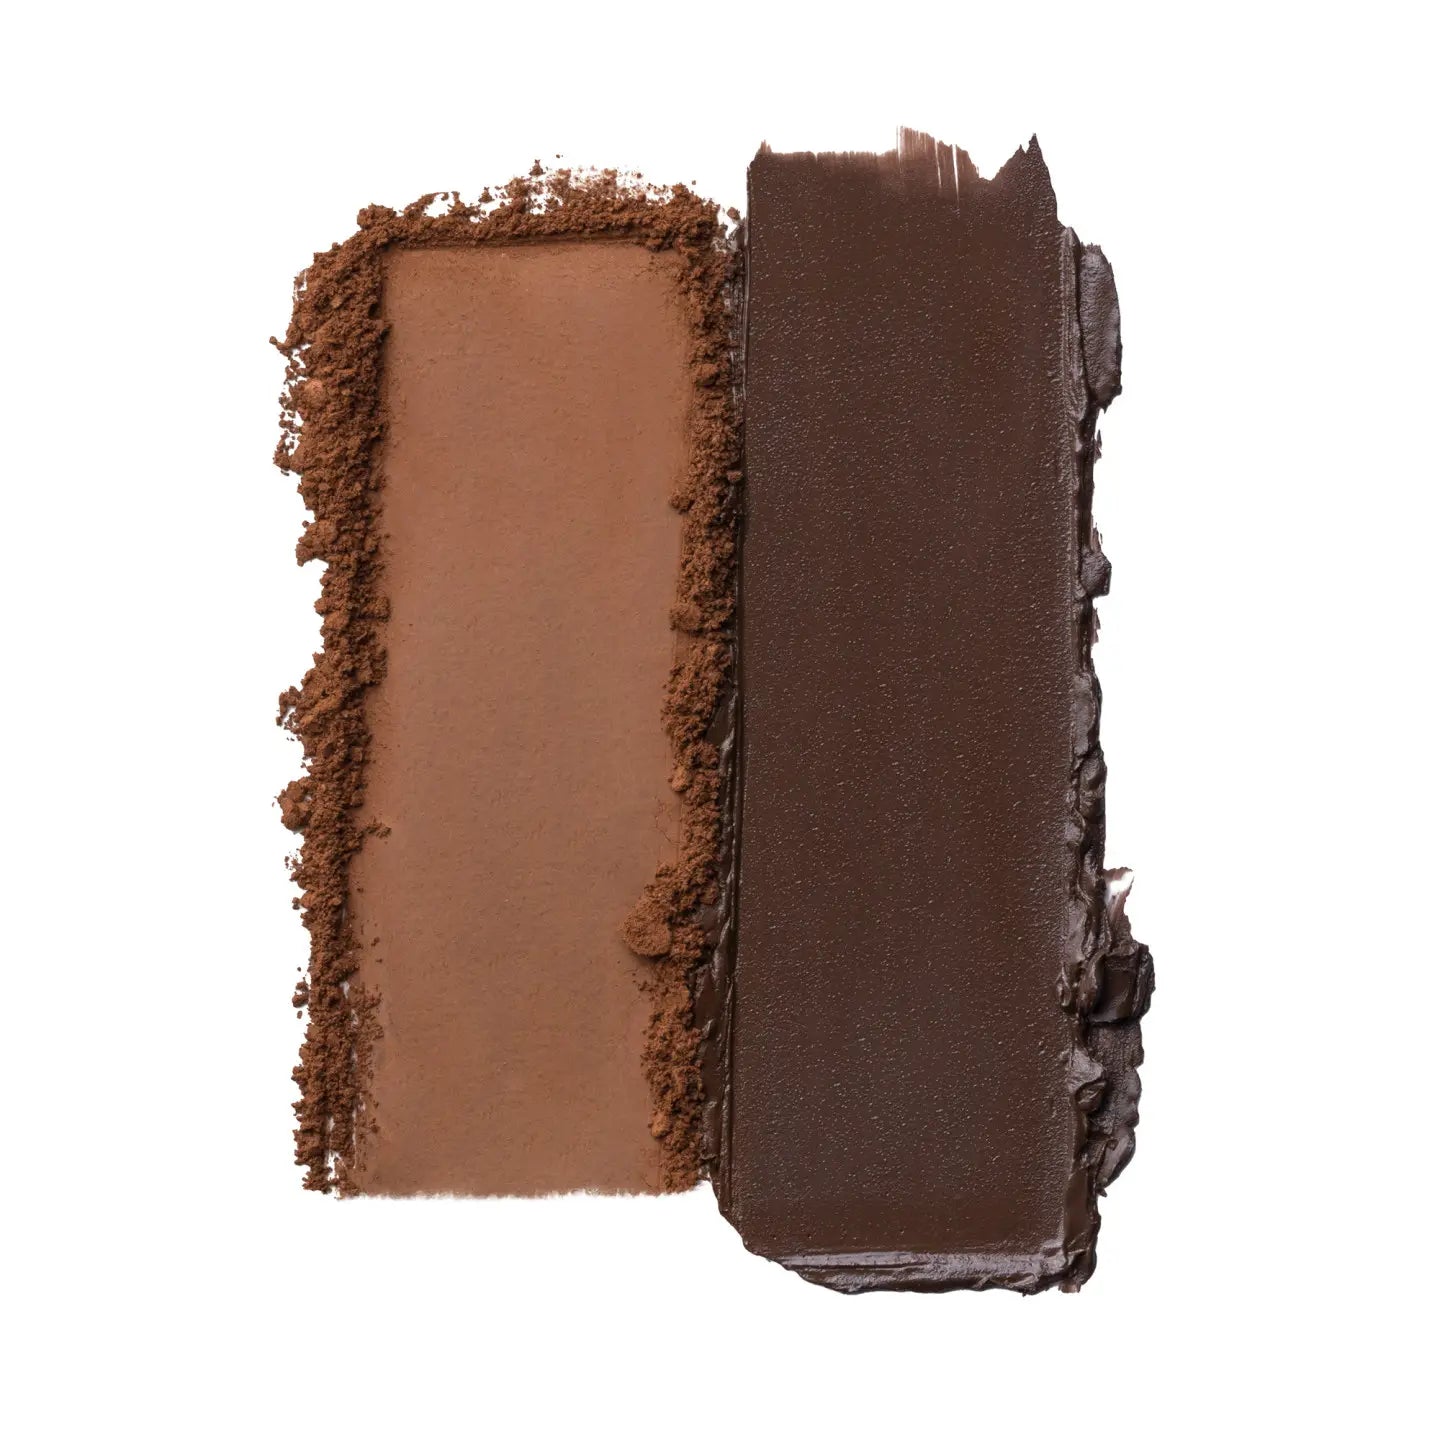 Selected: PICK IT UP Heat Wave Contour & Bronzer Duo